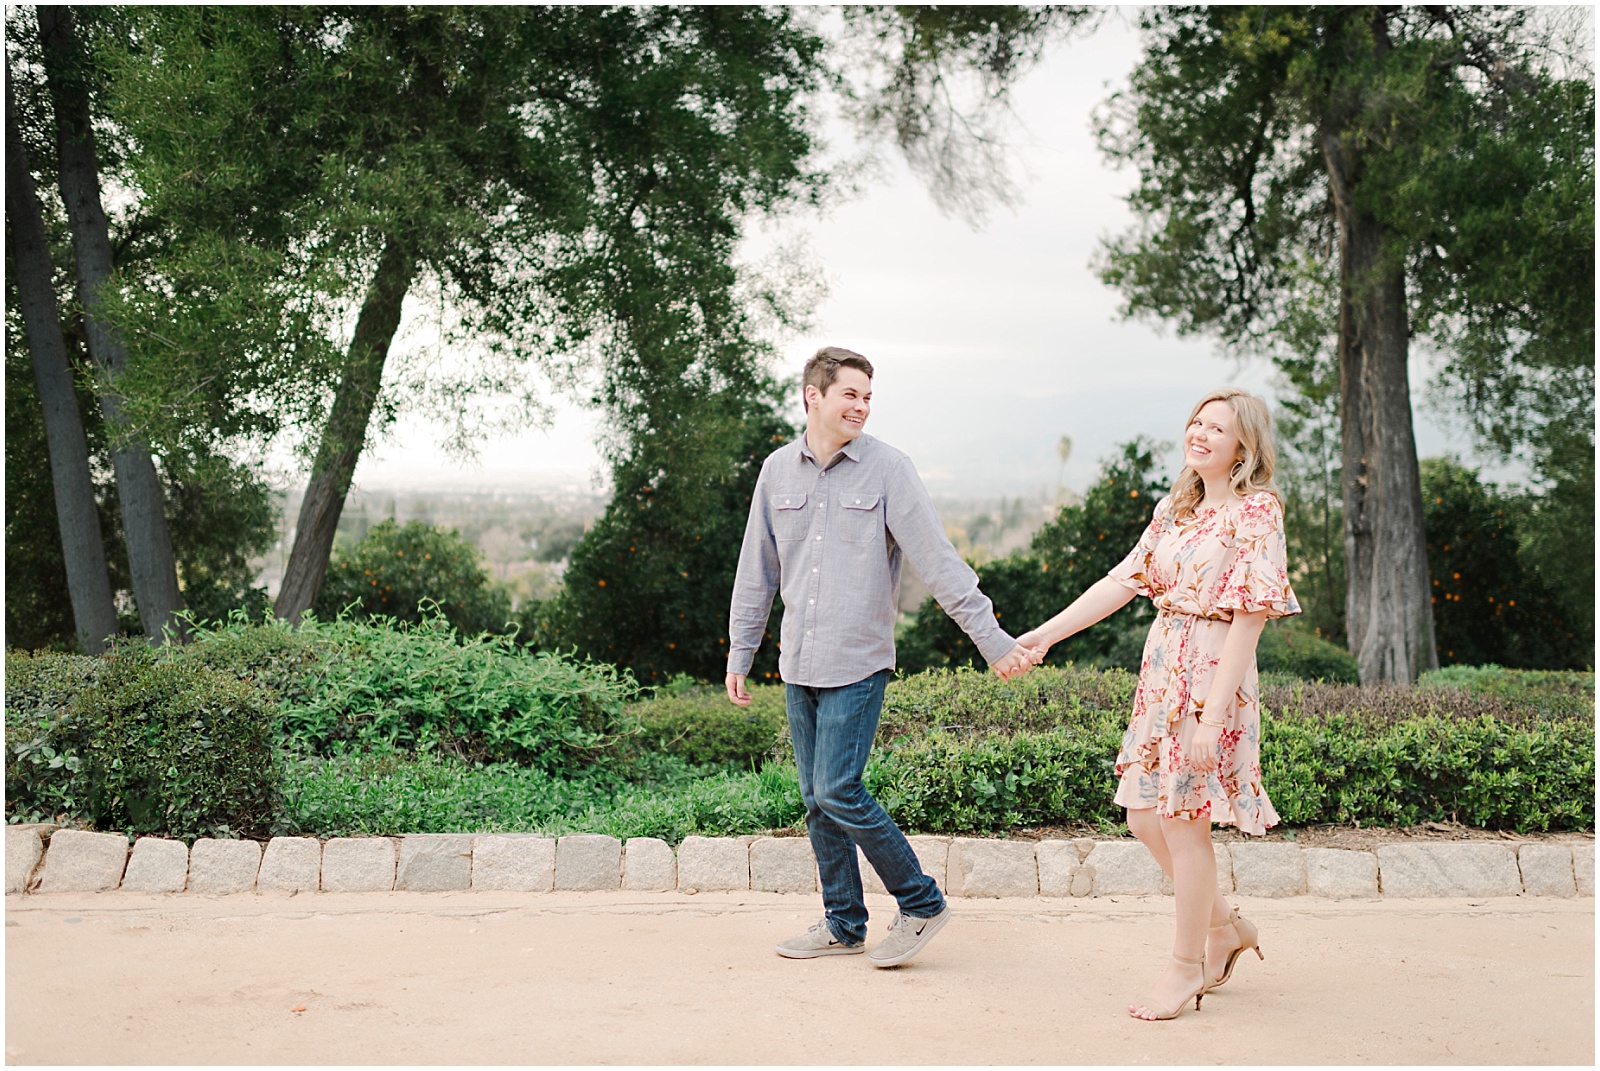 Redlands Engagement Session by Mollie Jane Photography. To see more go to www.molliejanephotography.com